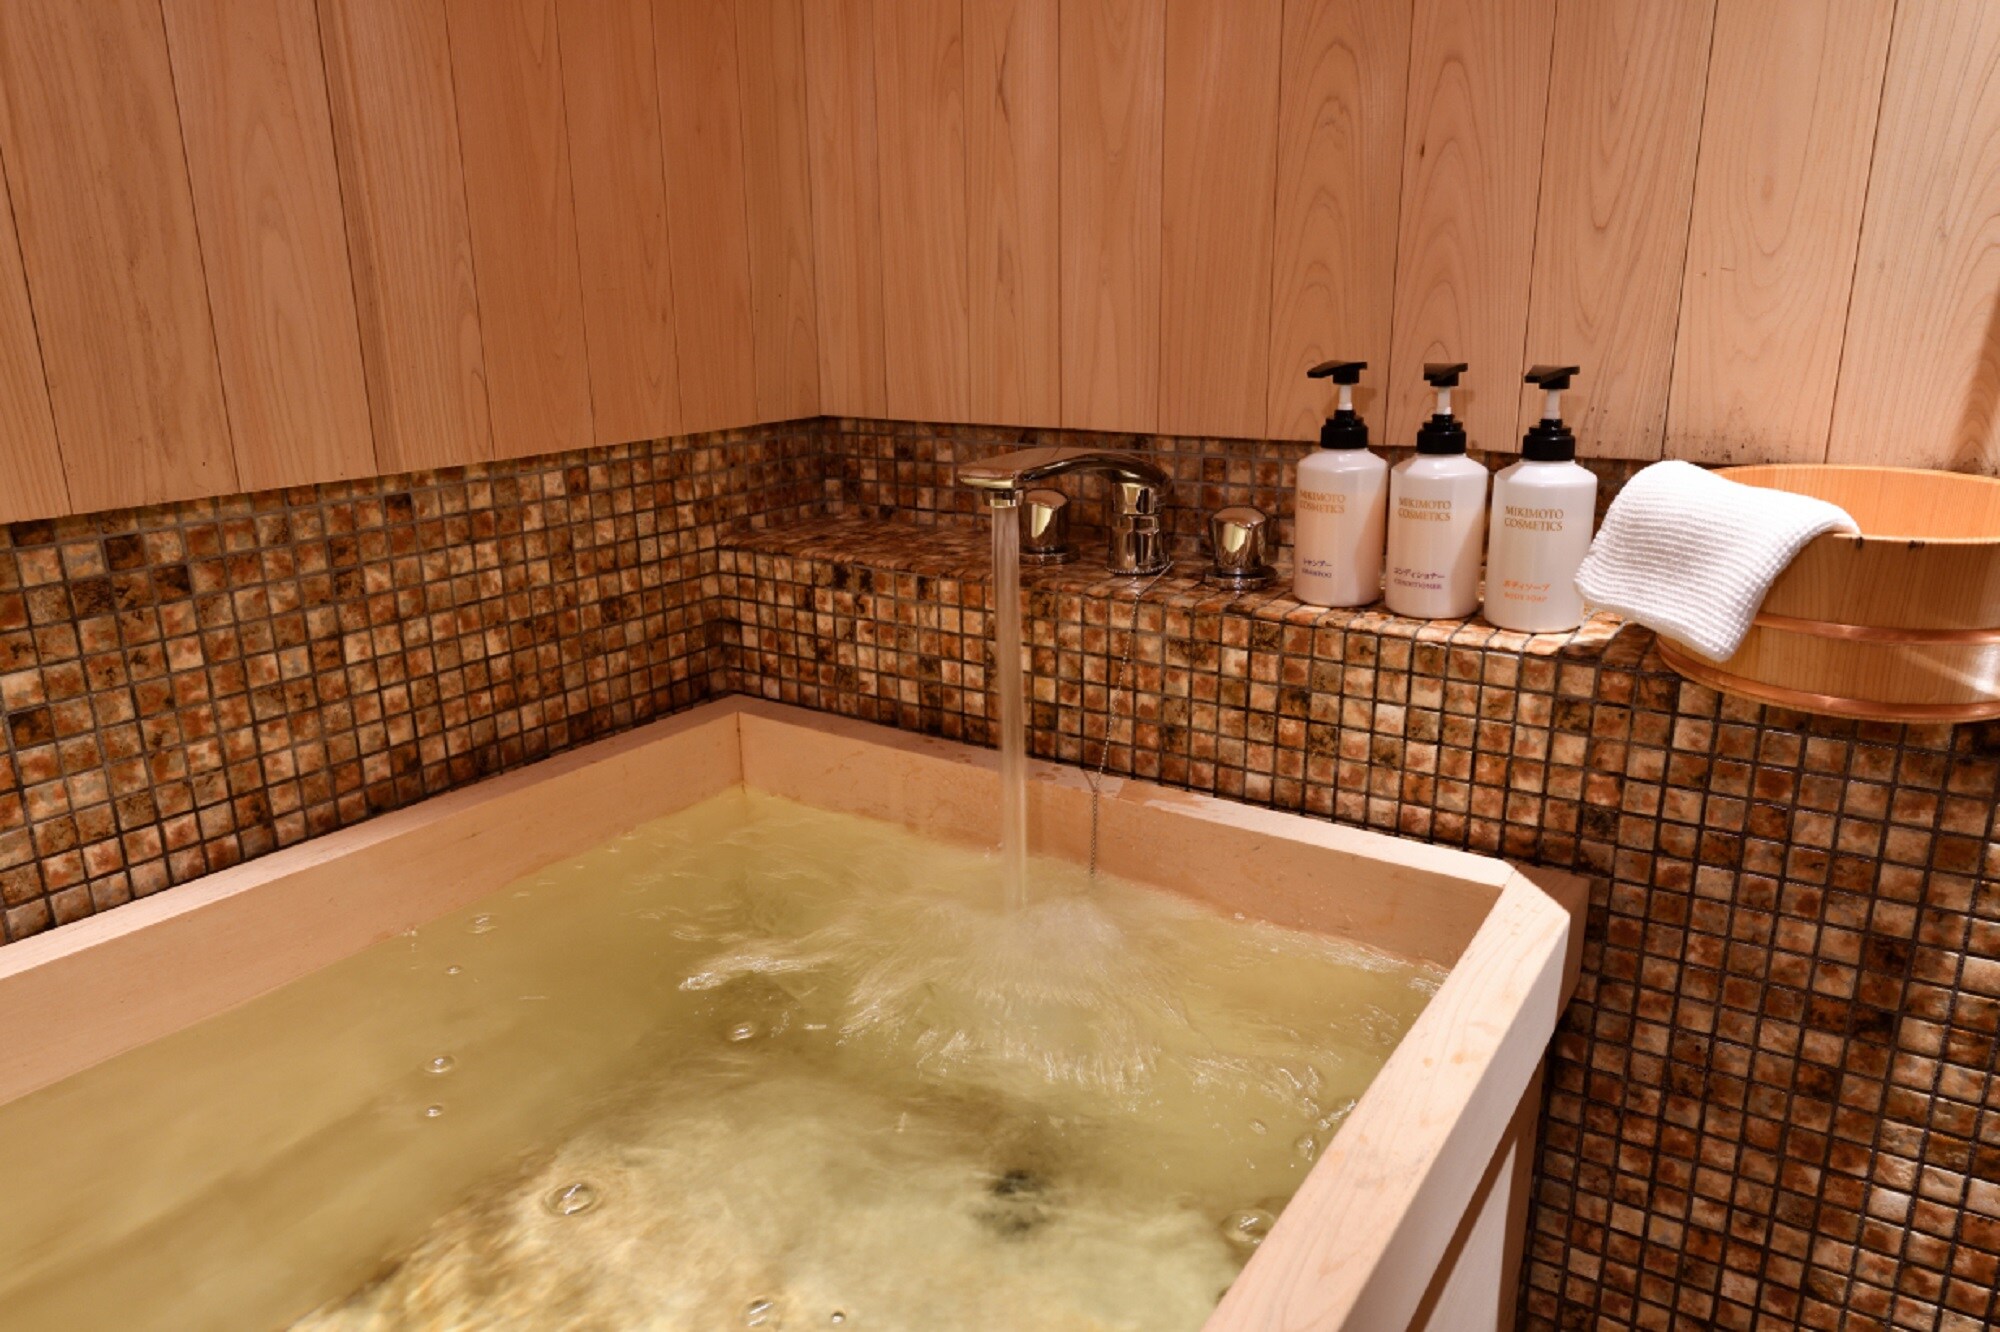 All guest rooms have a cypress bath